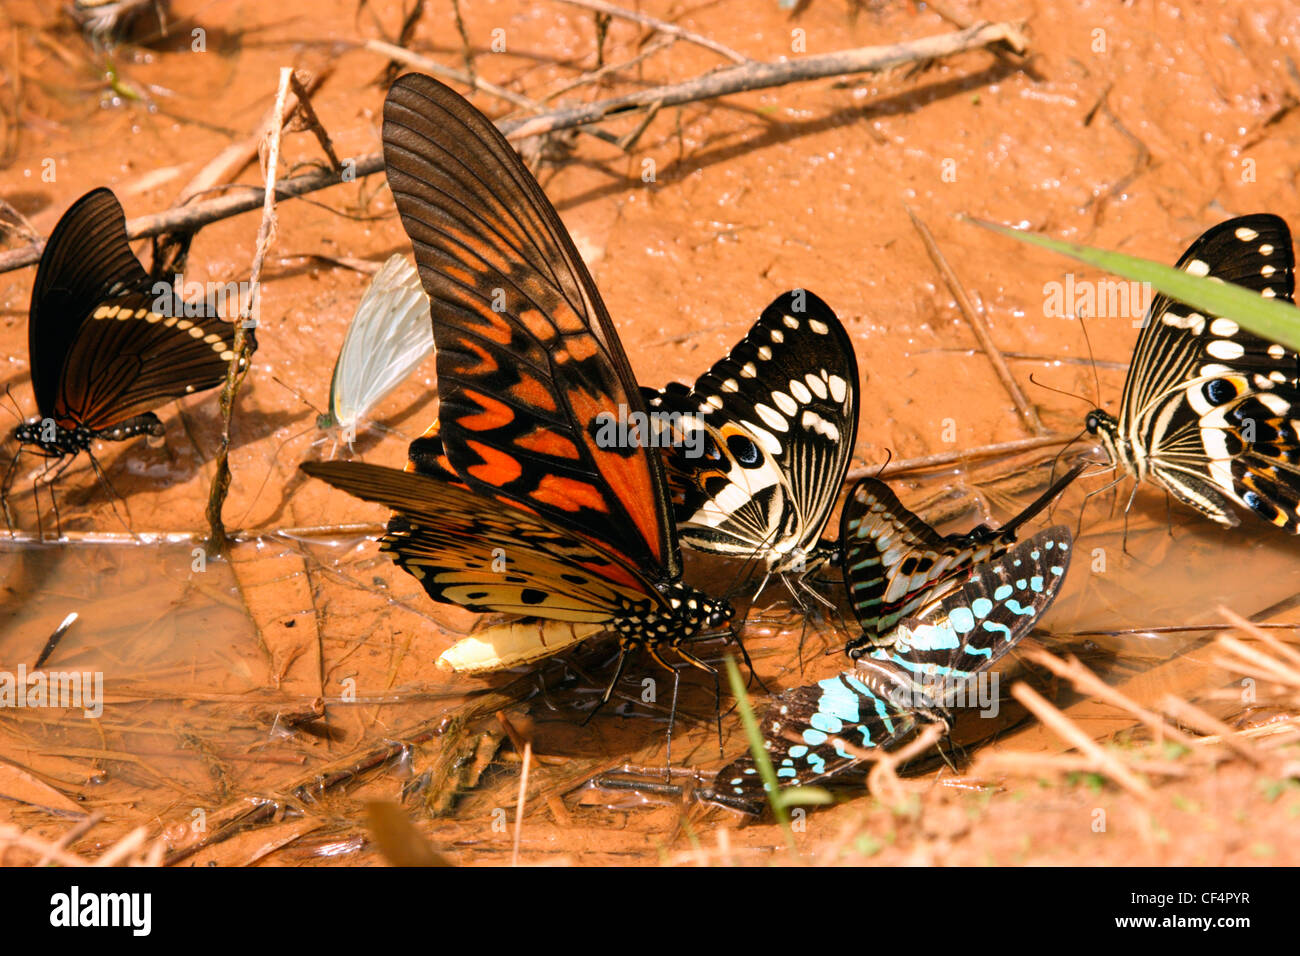 Giant swallowtail butterfly male (Papilio antimachus) drinking from a rainforest puddle alongside other swallowtails, Ghana. Stock Photo